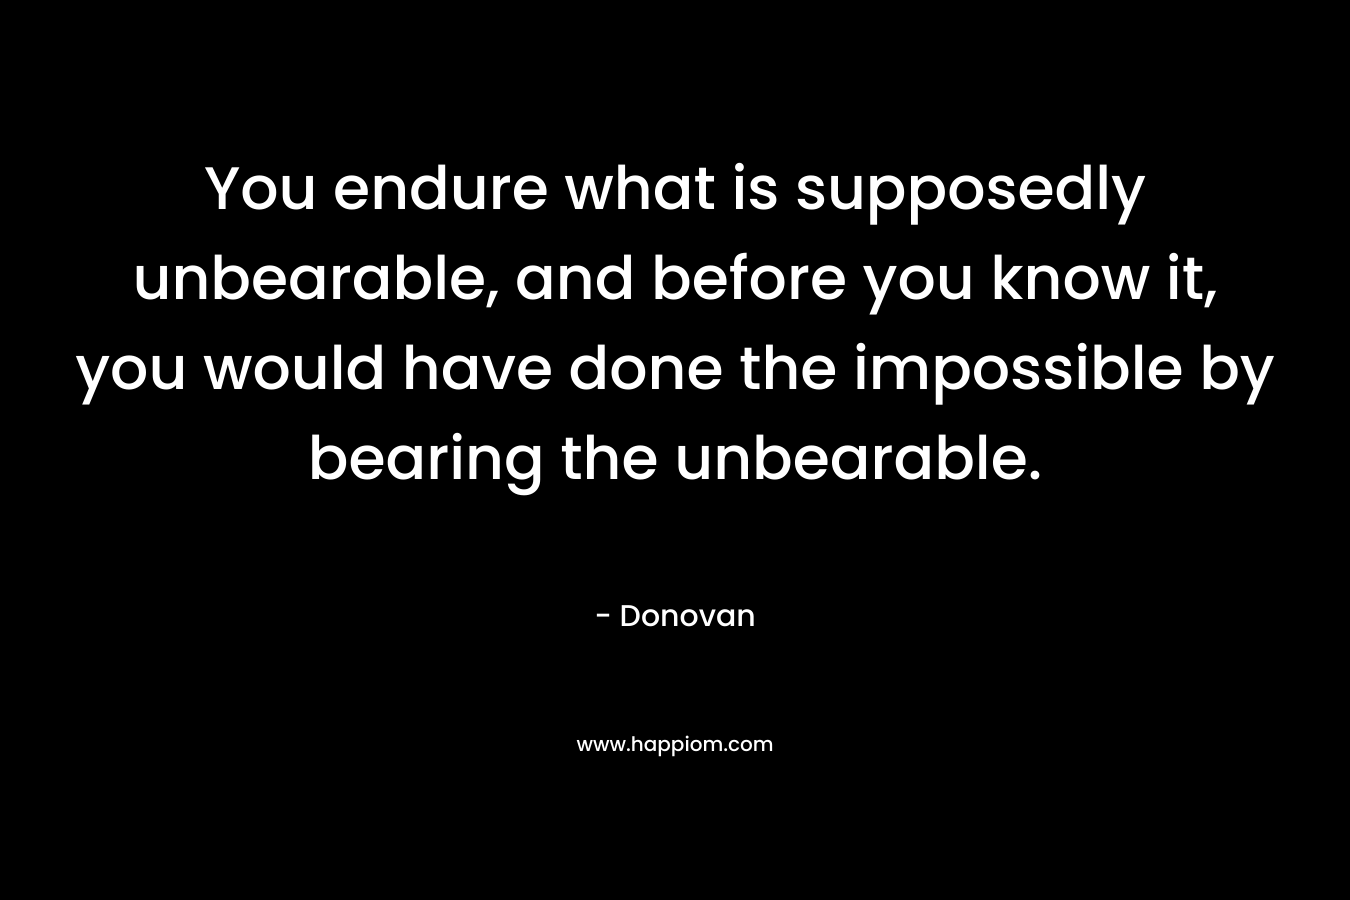 You endure what is supposedly unbearable, and before you know it, you would have done the impossible by bearing the unbearable.